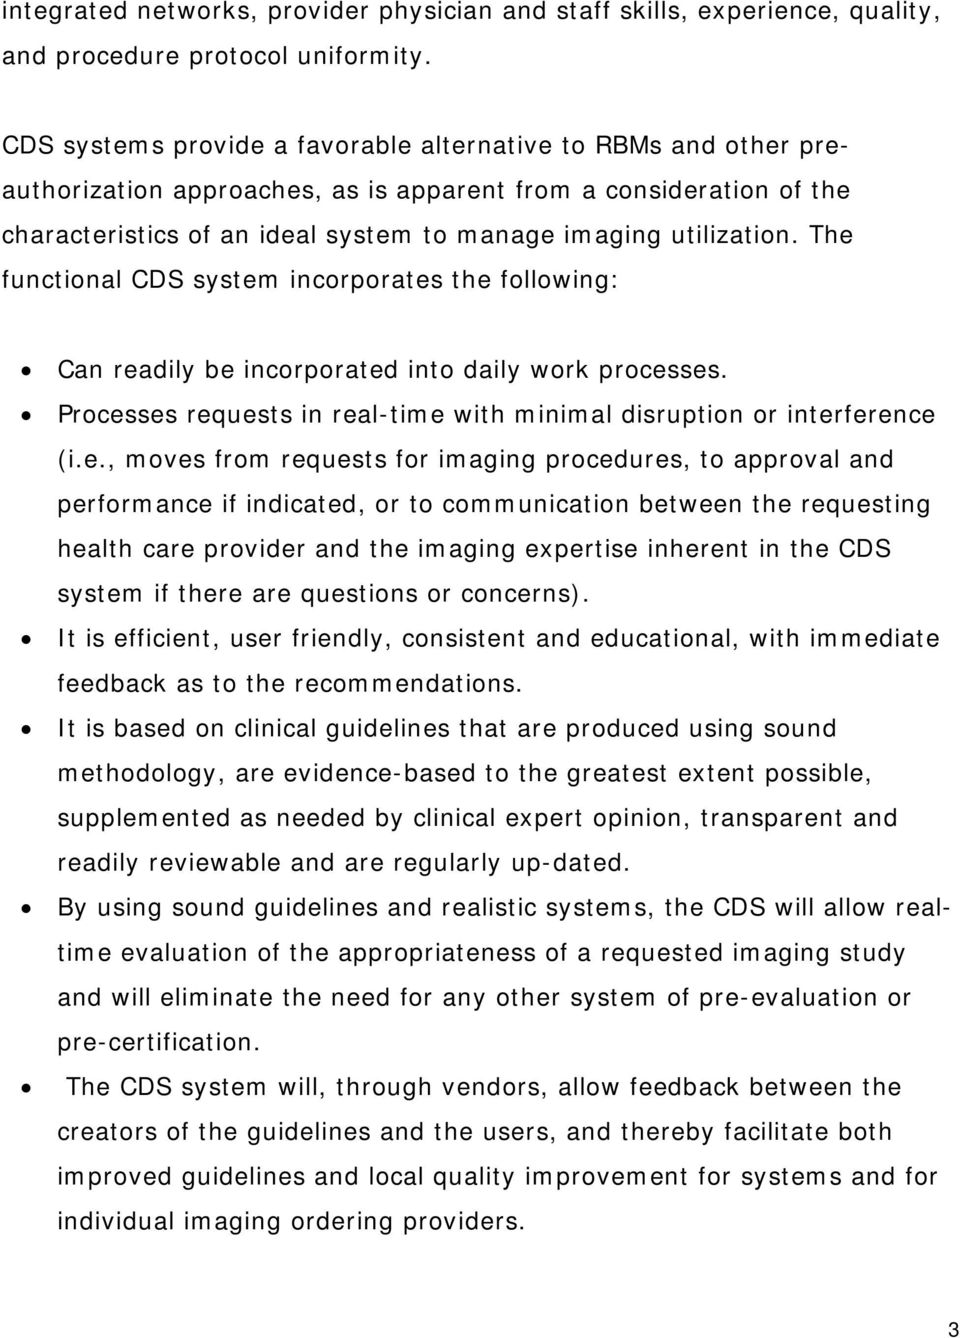 The functional CDS system incorporates the following: Can readily be incorporated into daily work processes. Processes requests in real-time with minimal disruption or interference (i.e., moves from